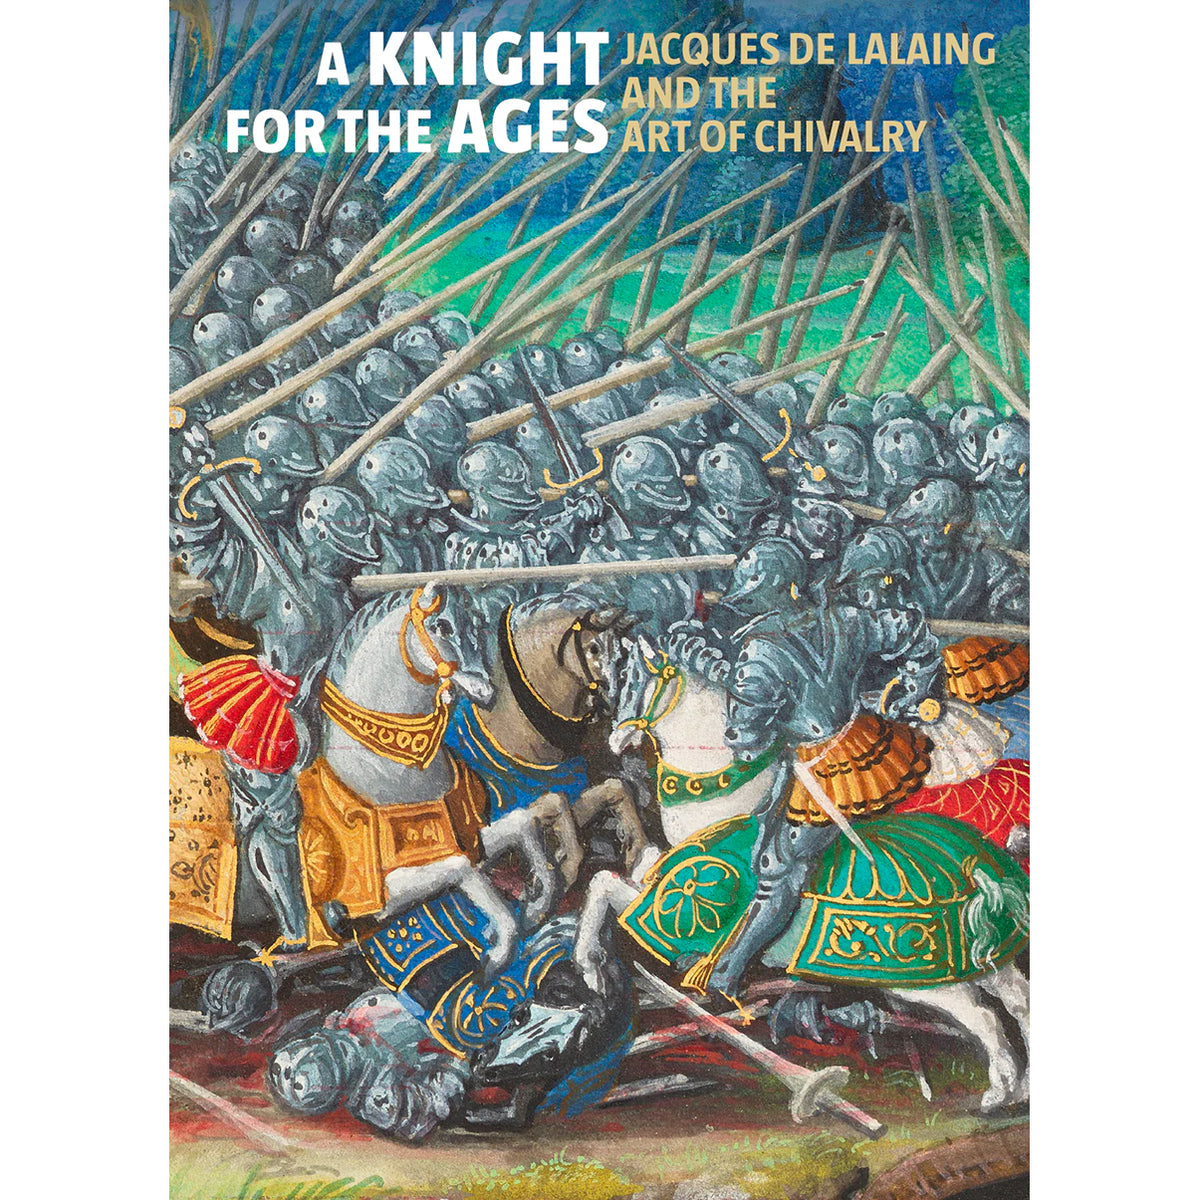 A Knight for the Ages: Jacques de Lalaing and the Art of Chivalry